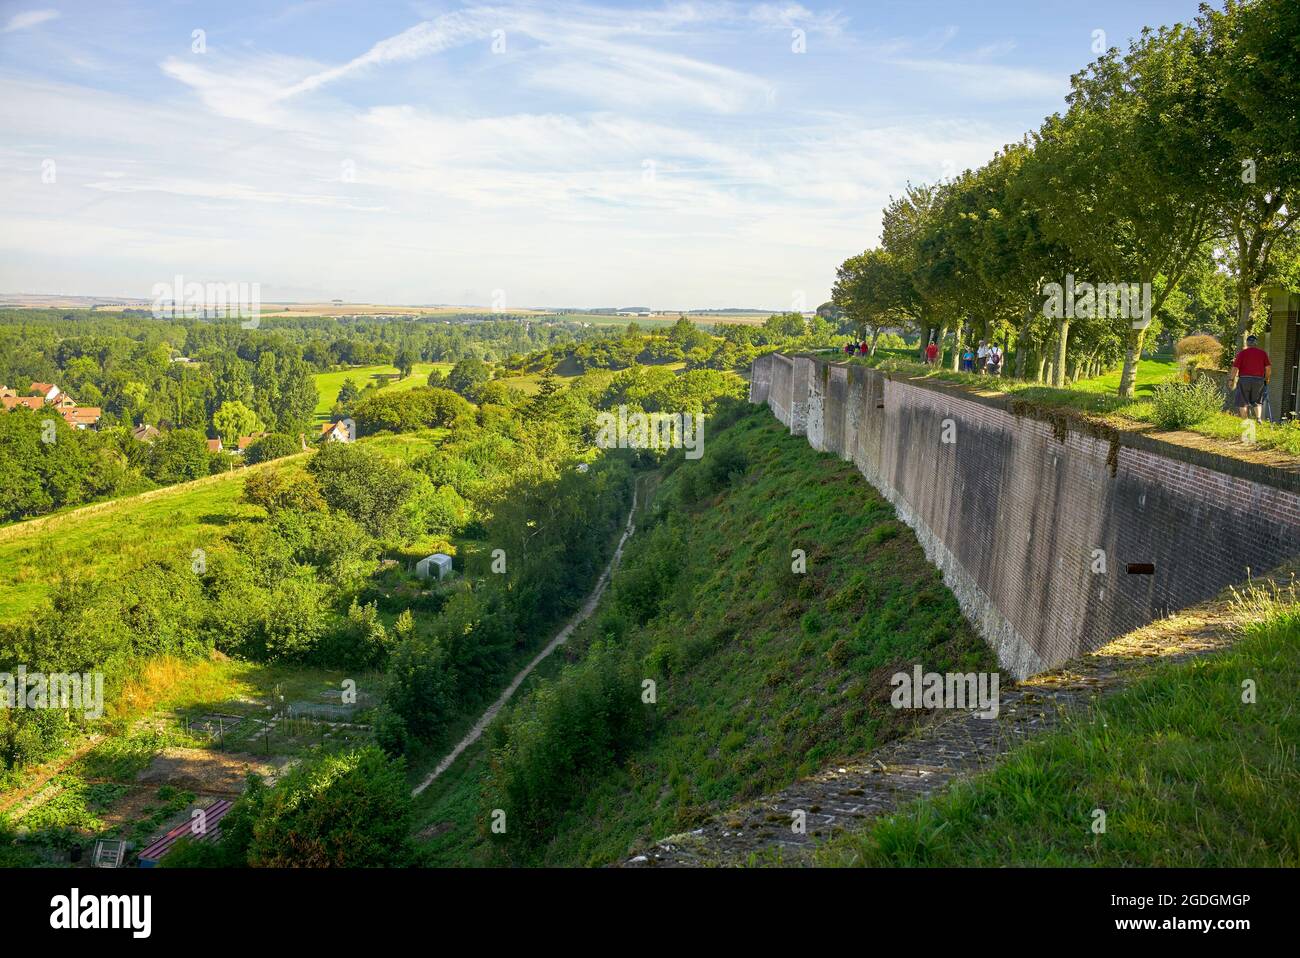 View of the ramparts of the popular tourist town of Montreuil sur Mer, Nord  Pas de Calais, Northern France. Stock Photo